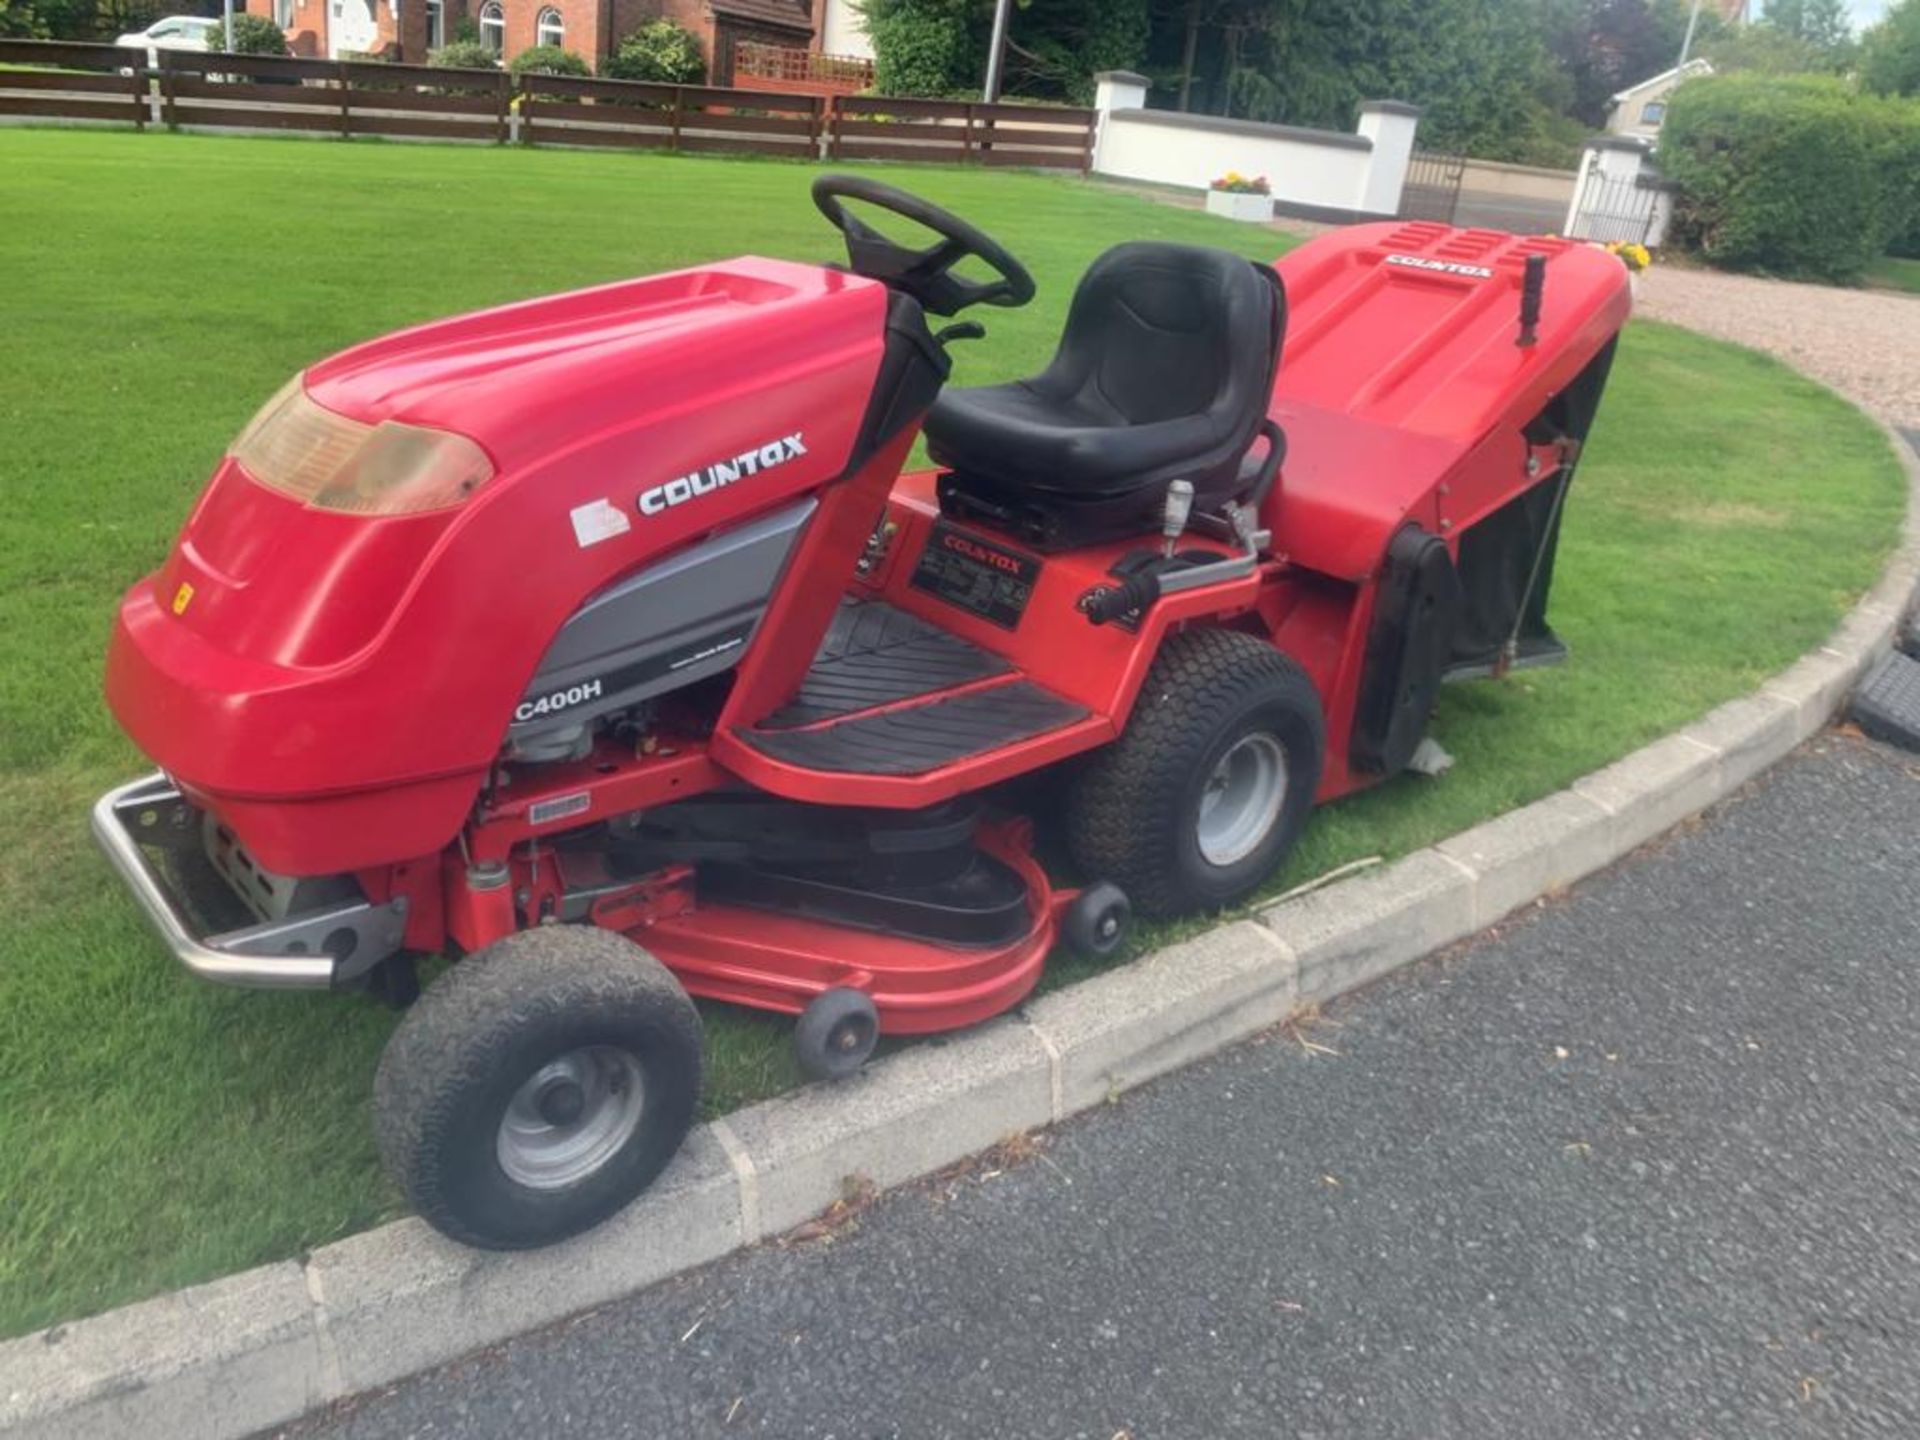 Countax C 400H Hydrostatic Ride On Mower - Image 3 of 4